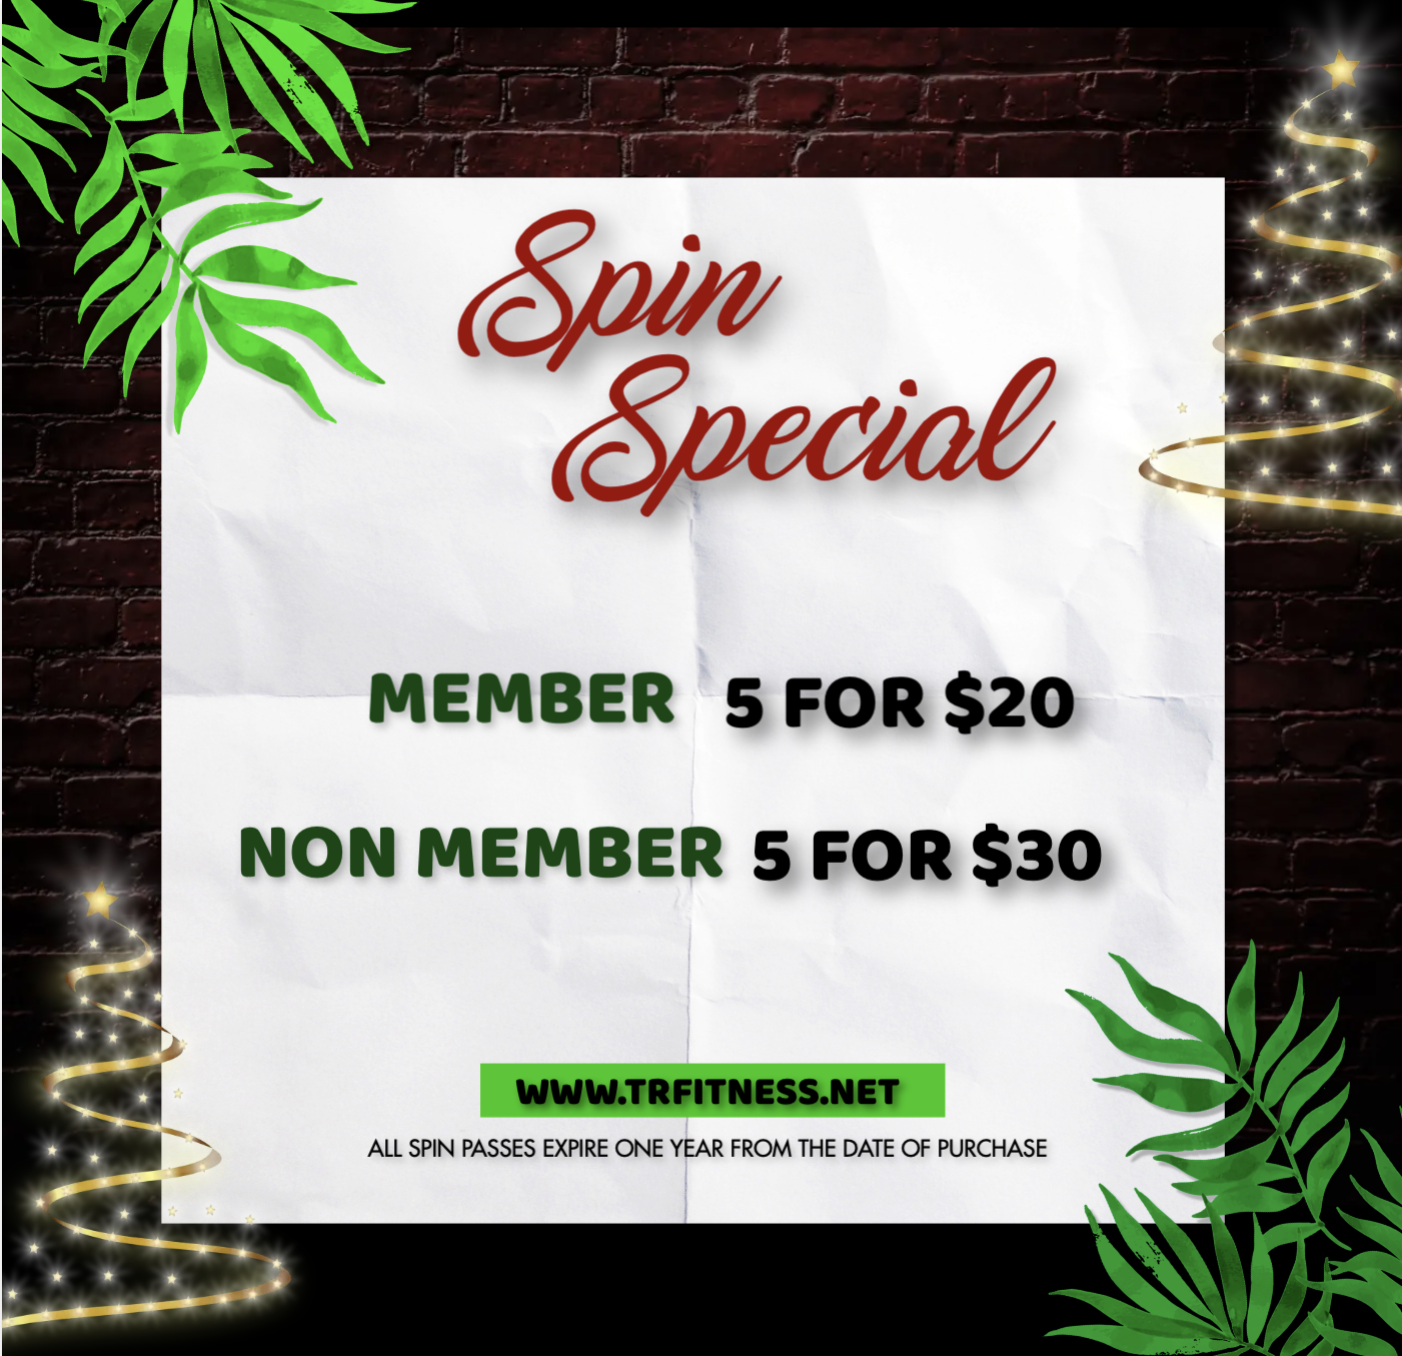 CHRISTMAS IN JULY - SPIN SPECIAL